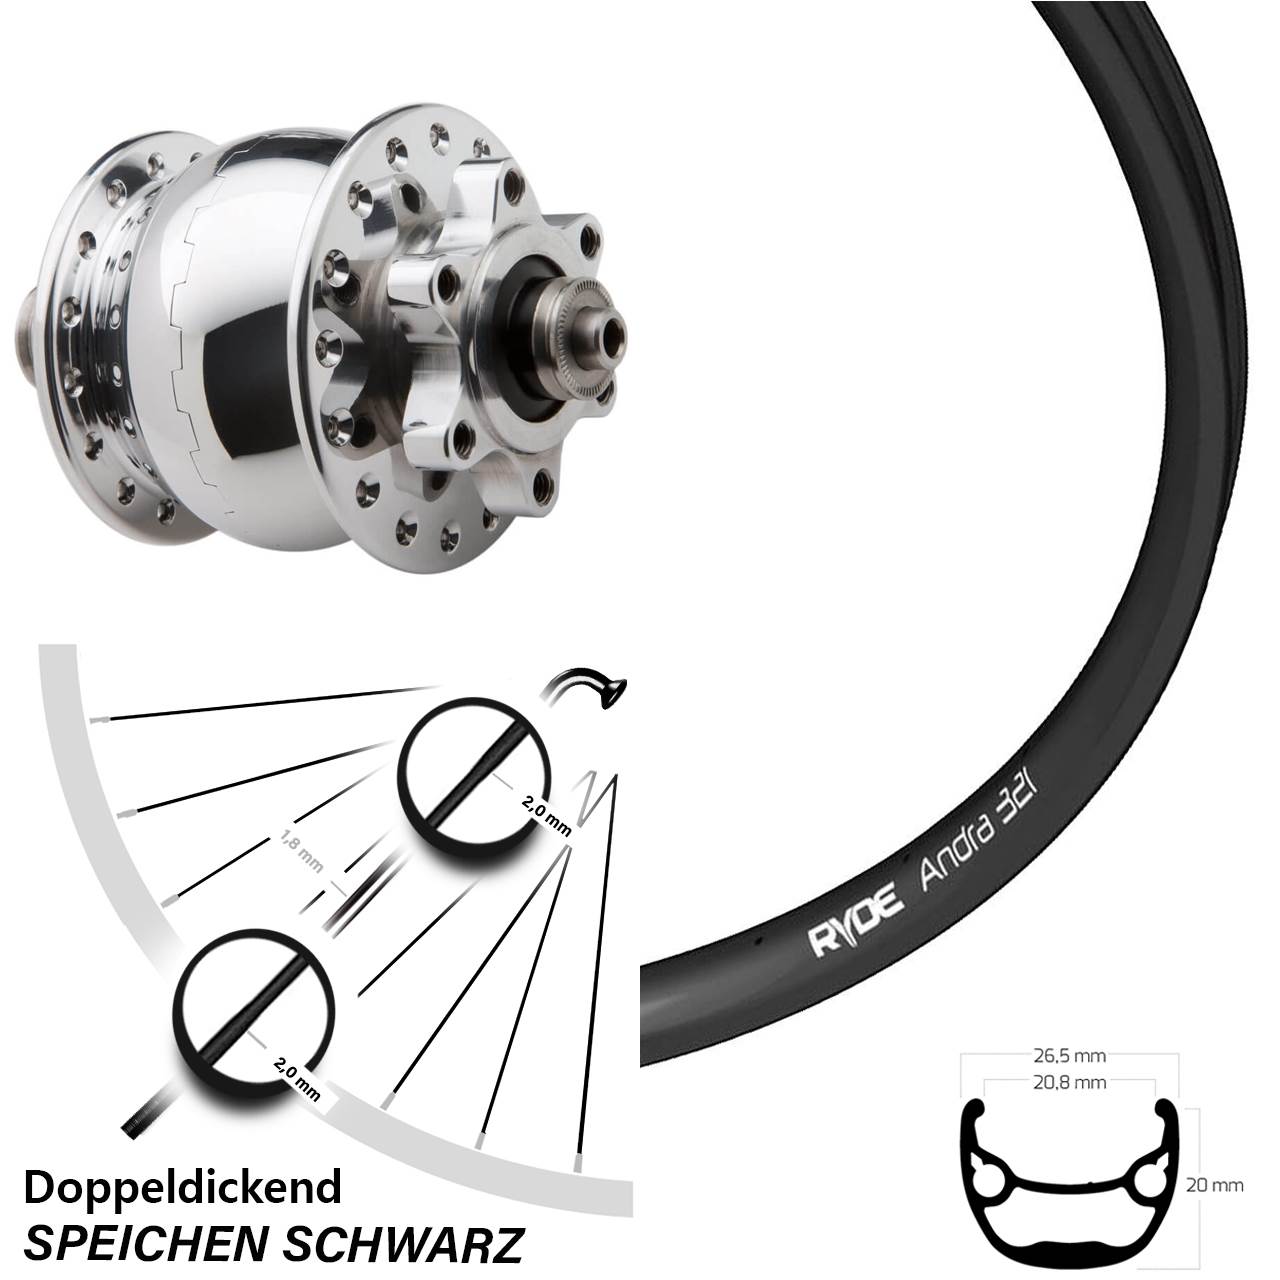 Vorderrad inklusive Ryde Andra 321 Disc Son 28-29 Zoll